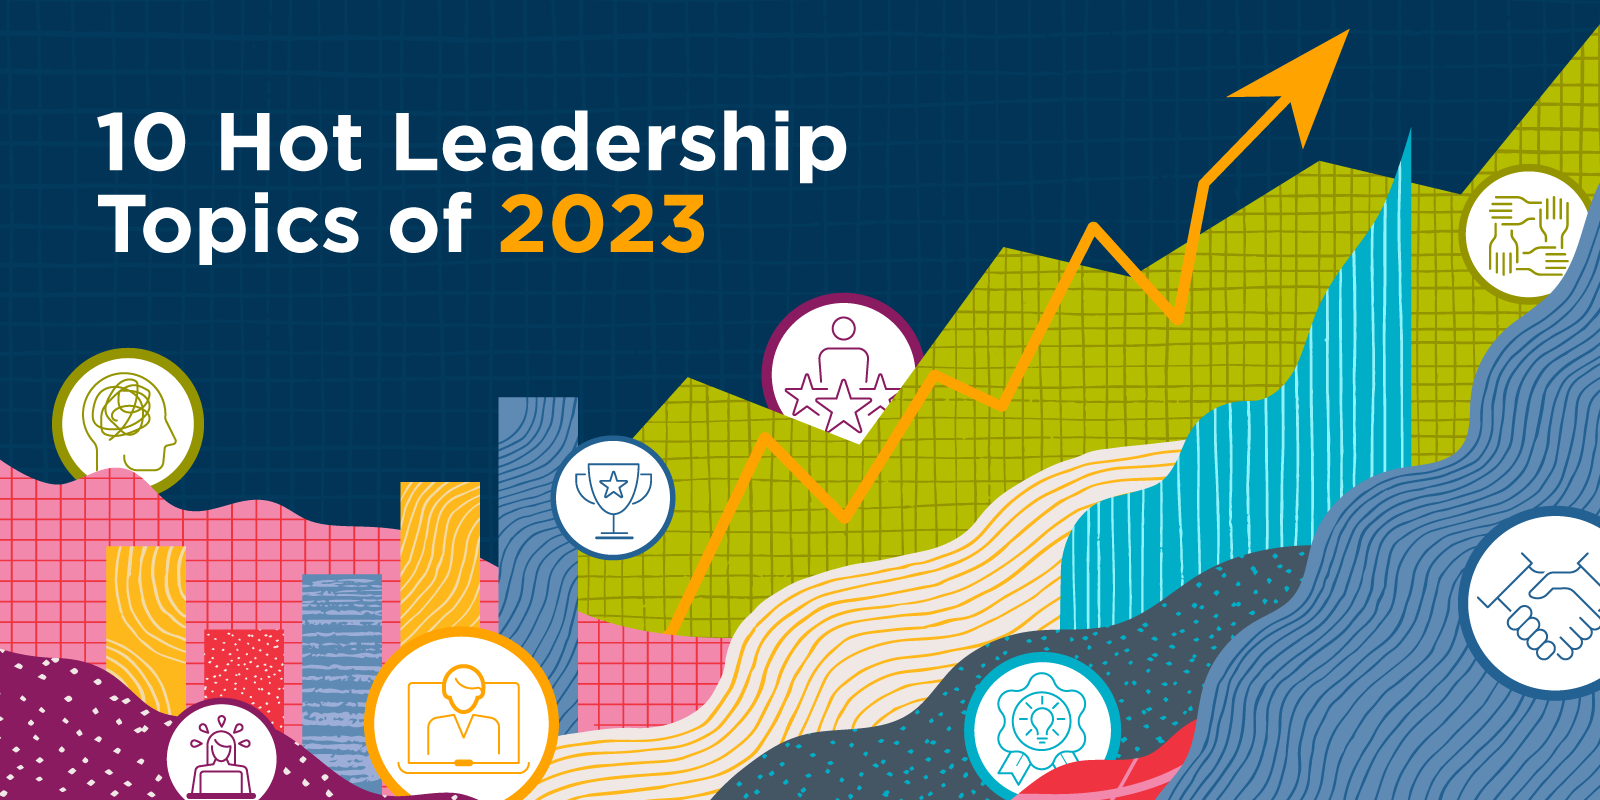 Learn the 10 Hot Leadership Topics for 2023 DDI